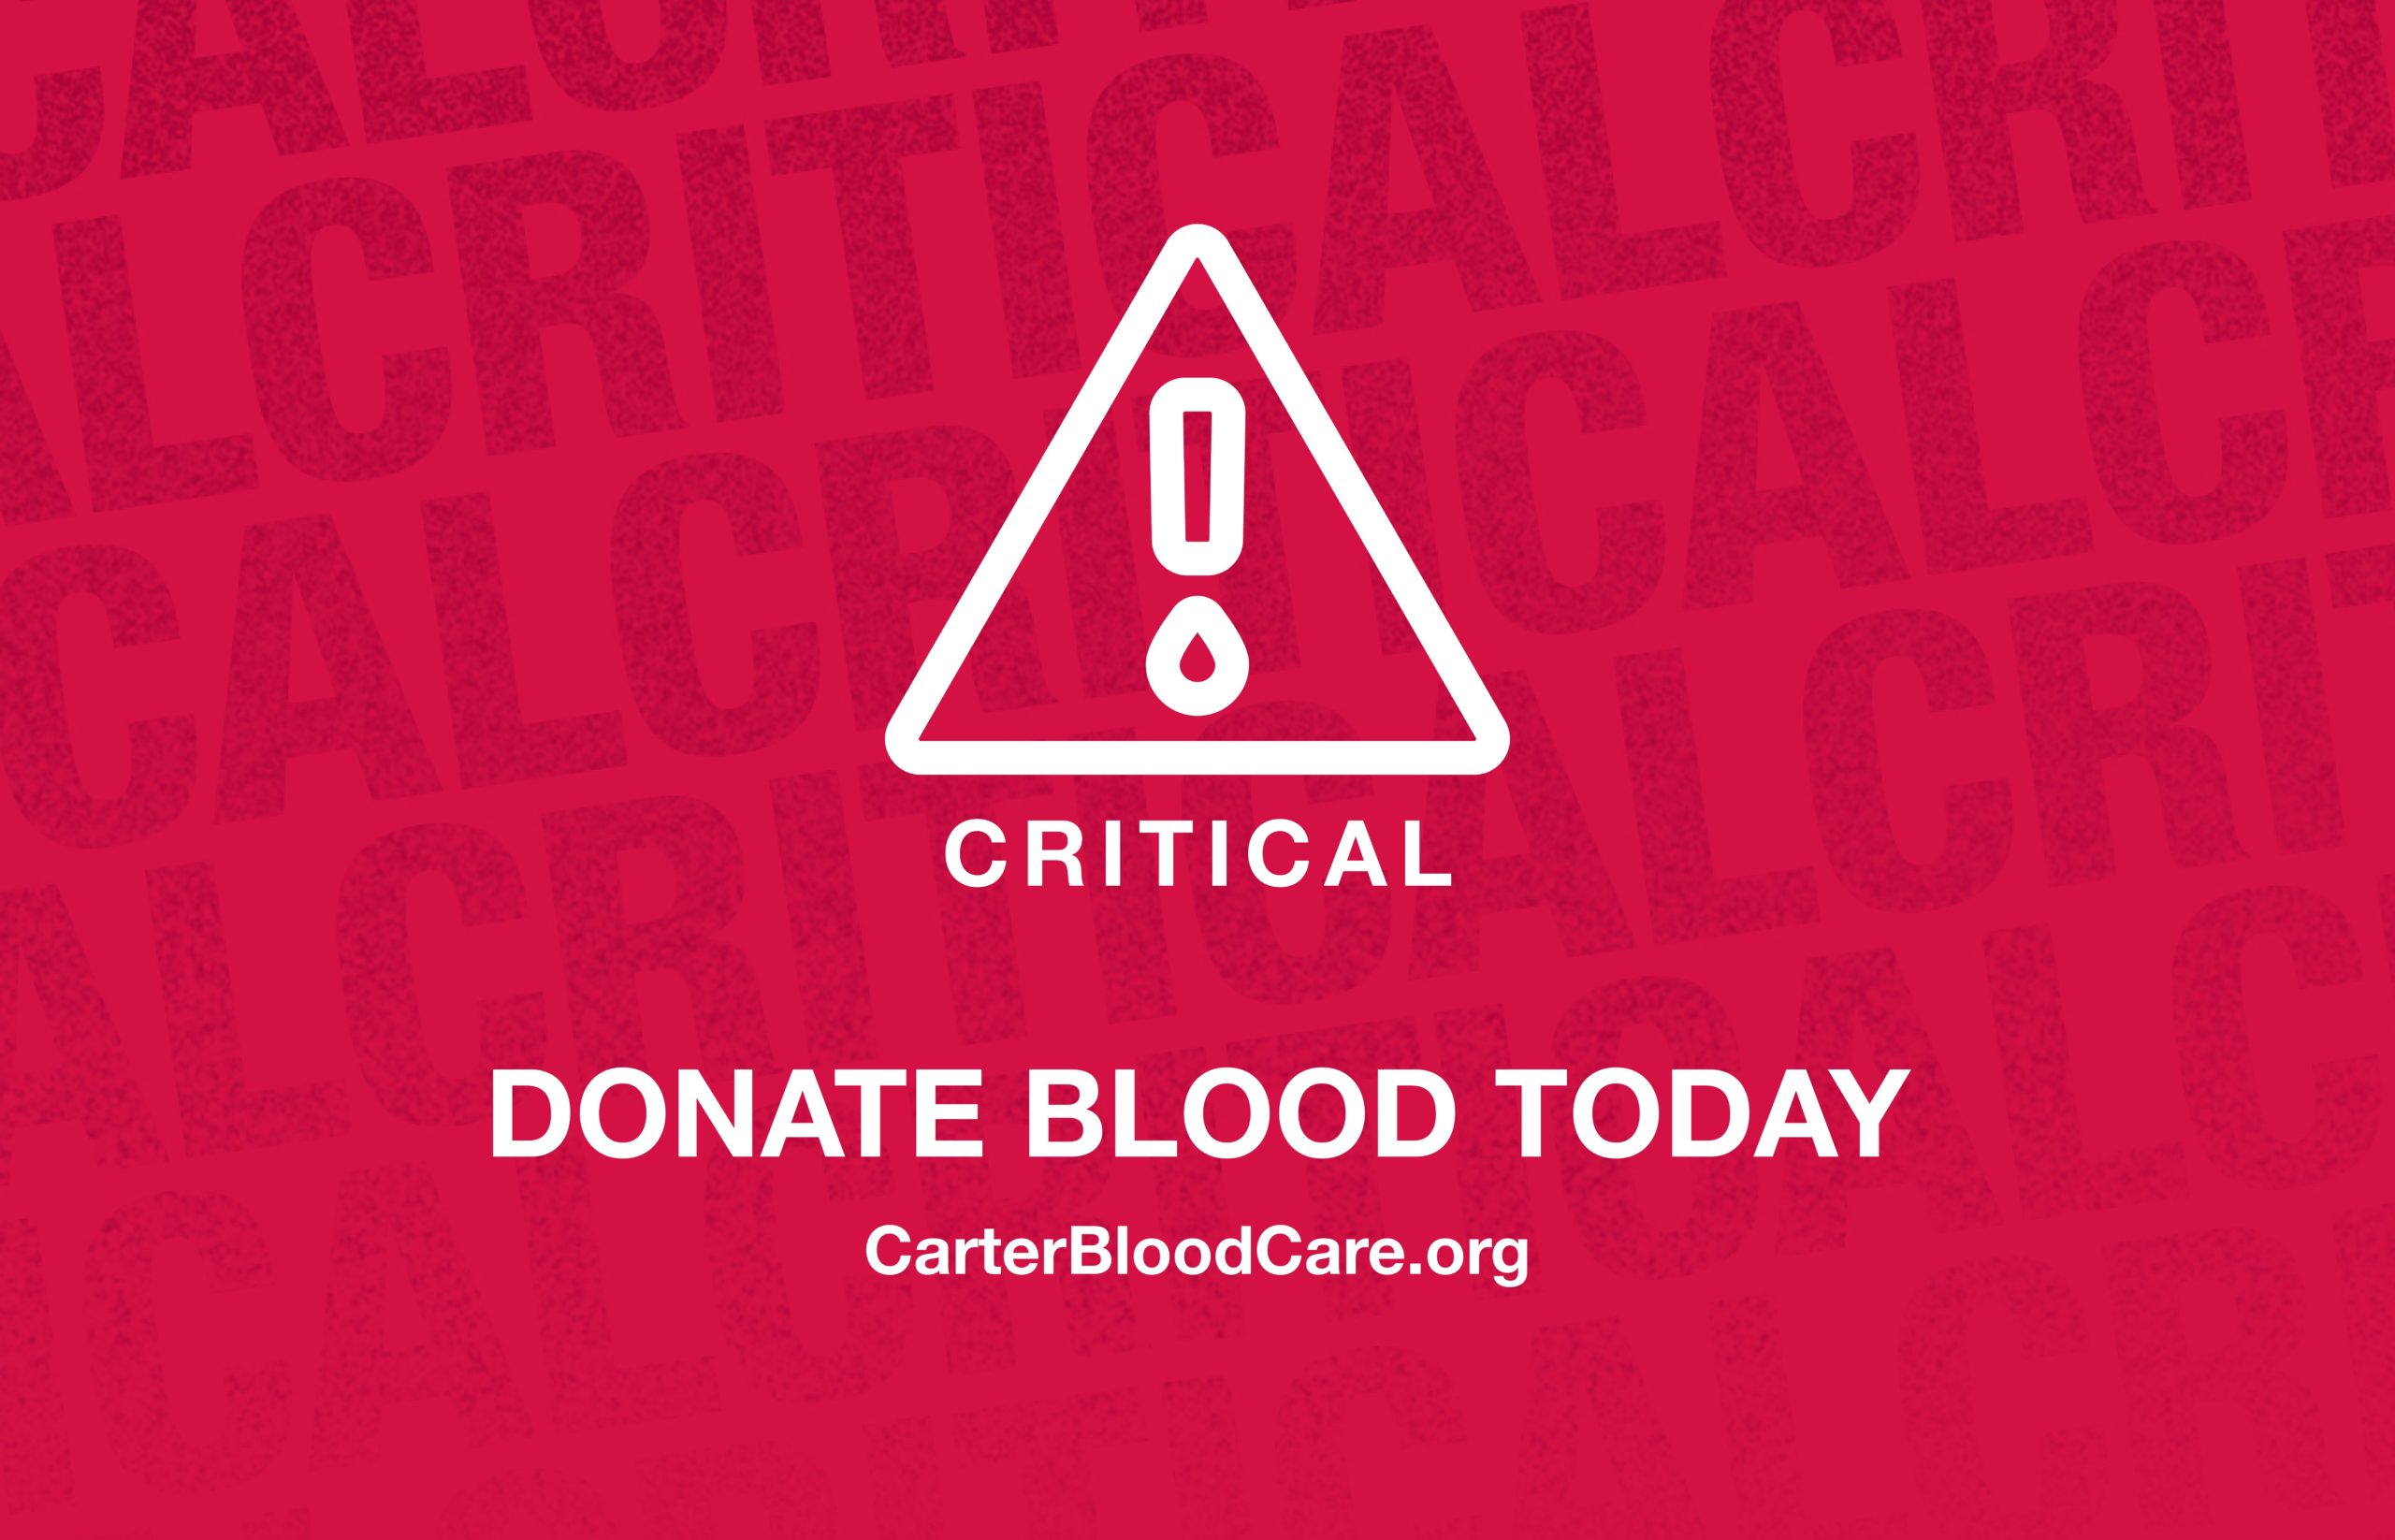 Carter BloodCare declares blood supply in critical need